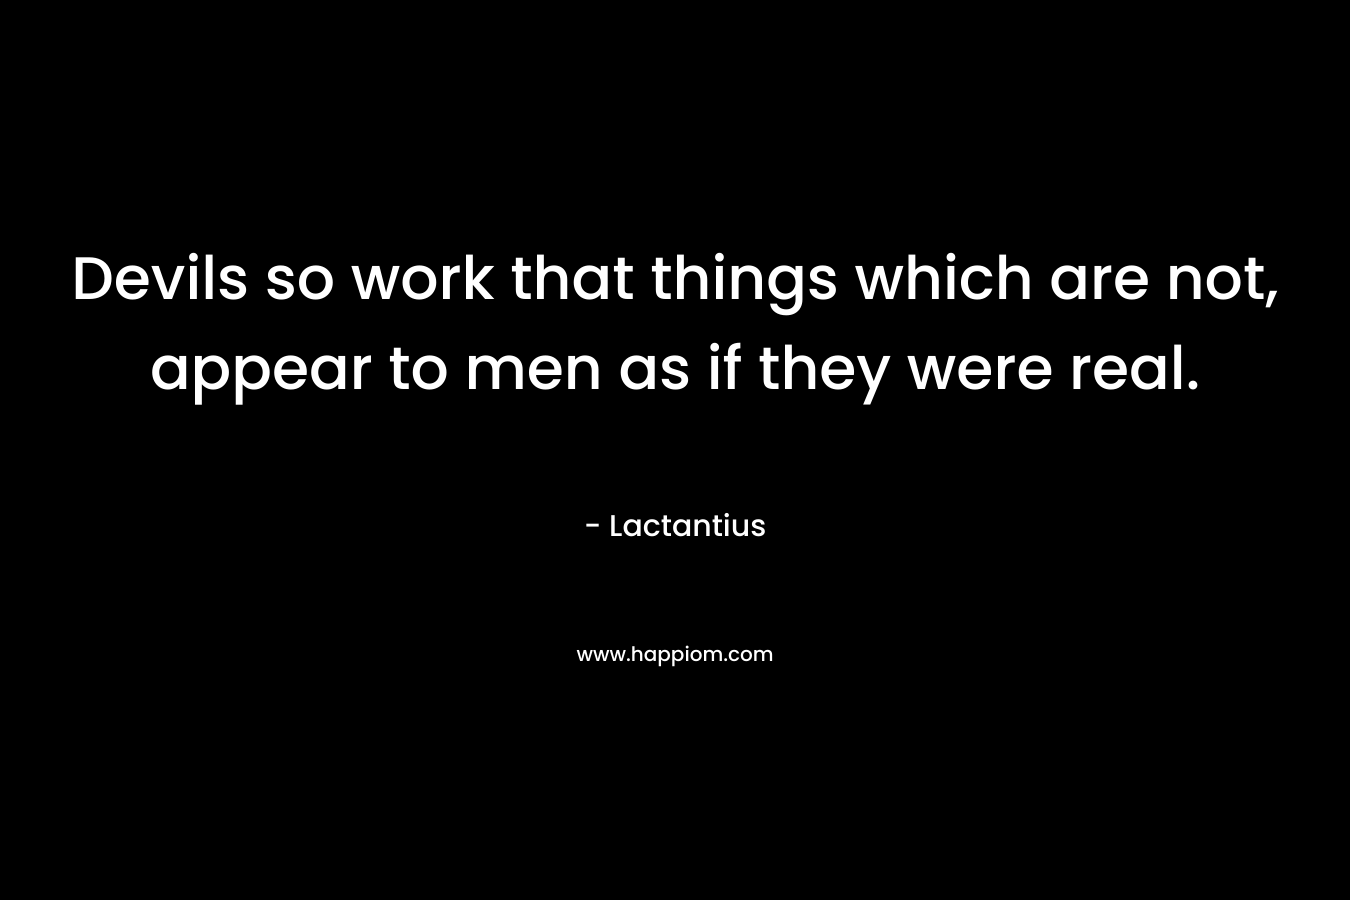 Devils so work that things which are not, appear to men as if they were real. – Lactantius